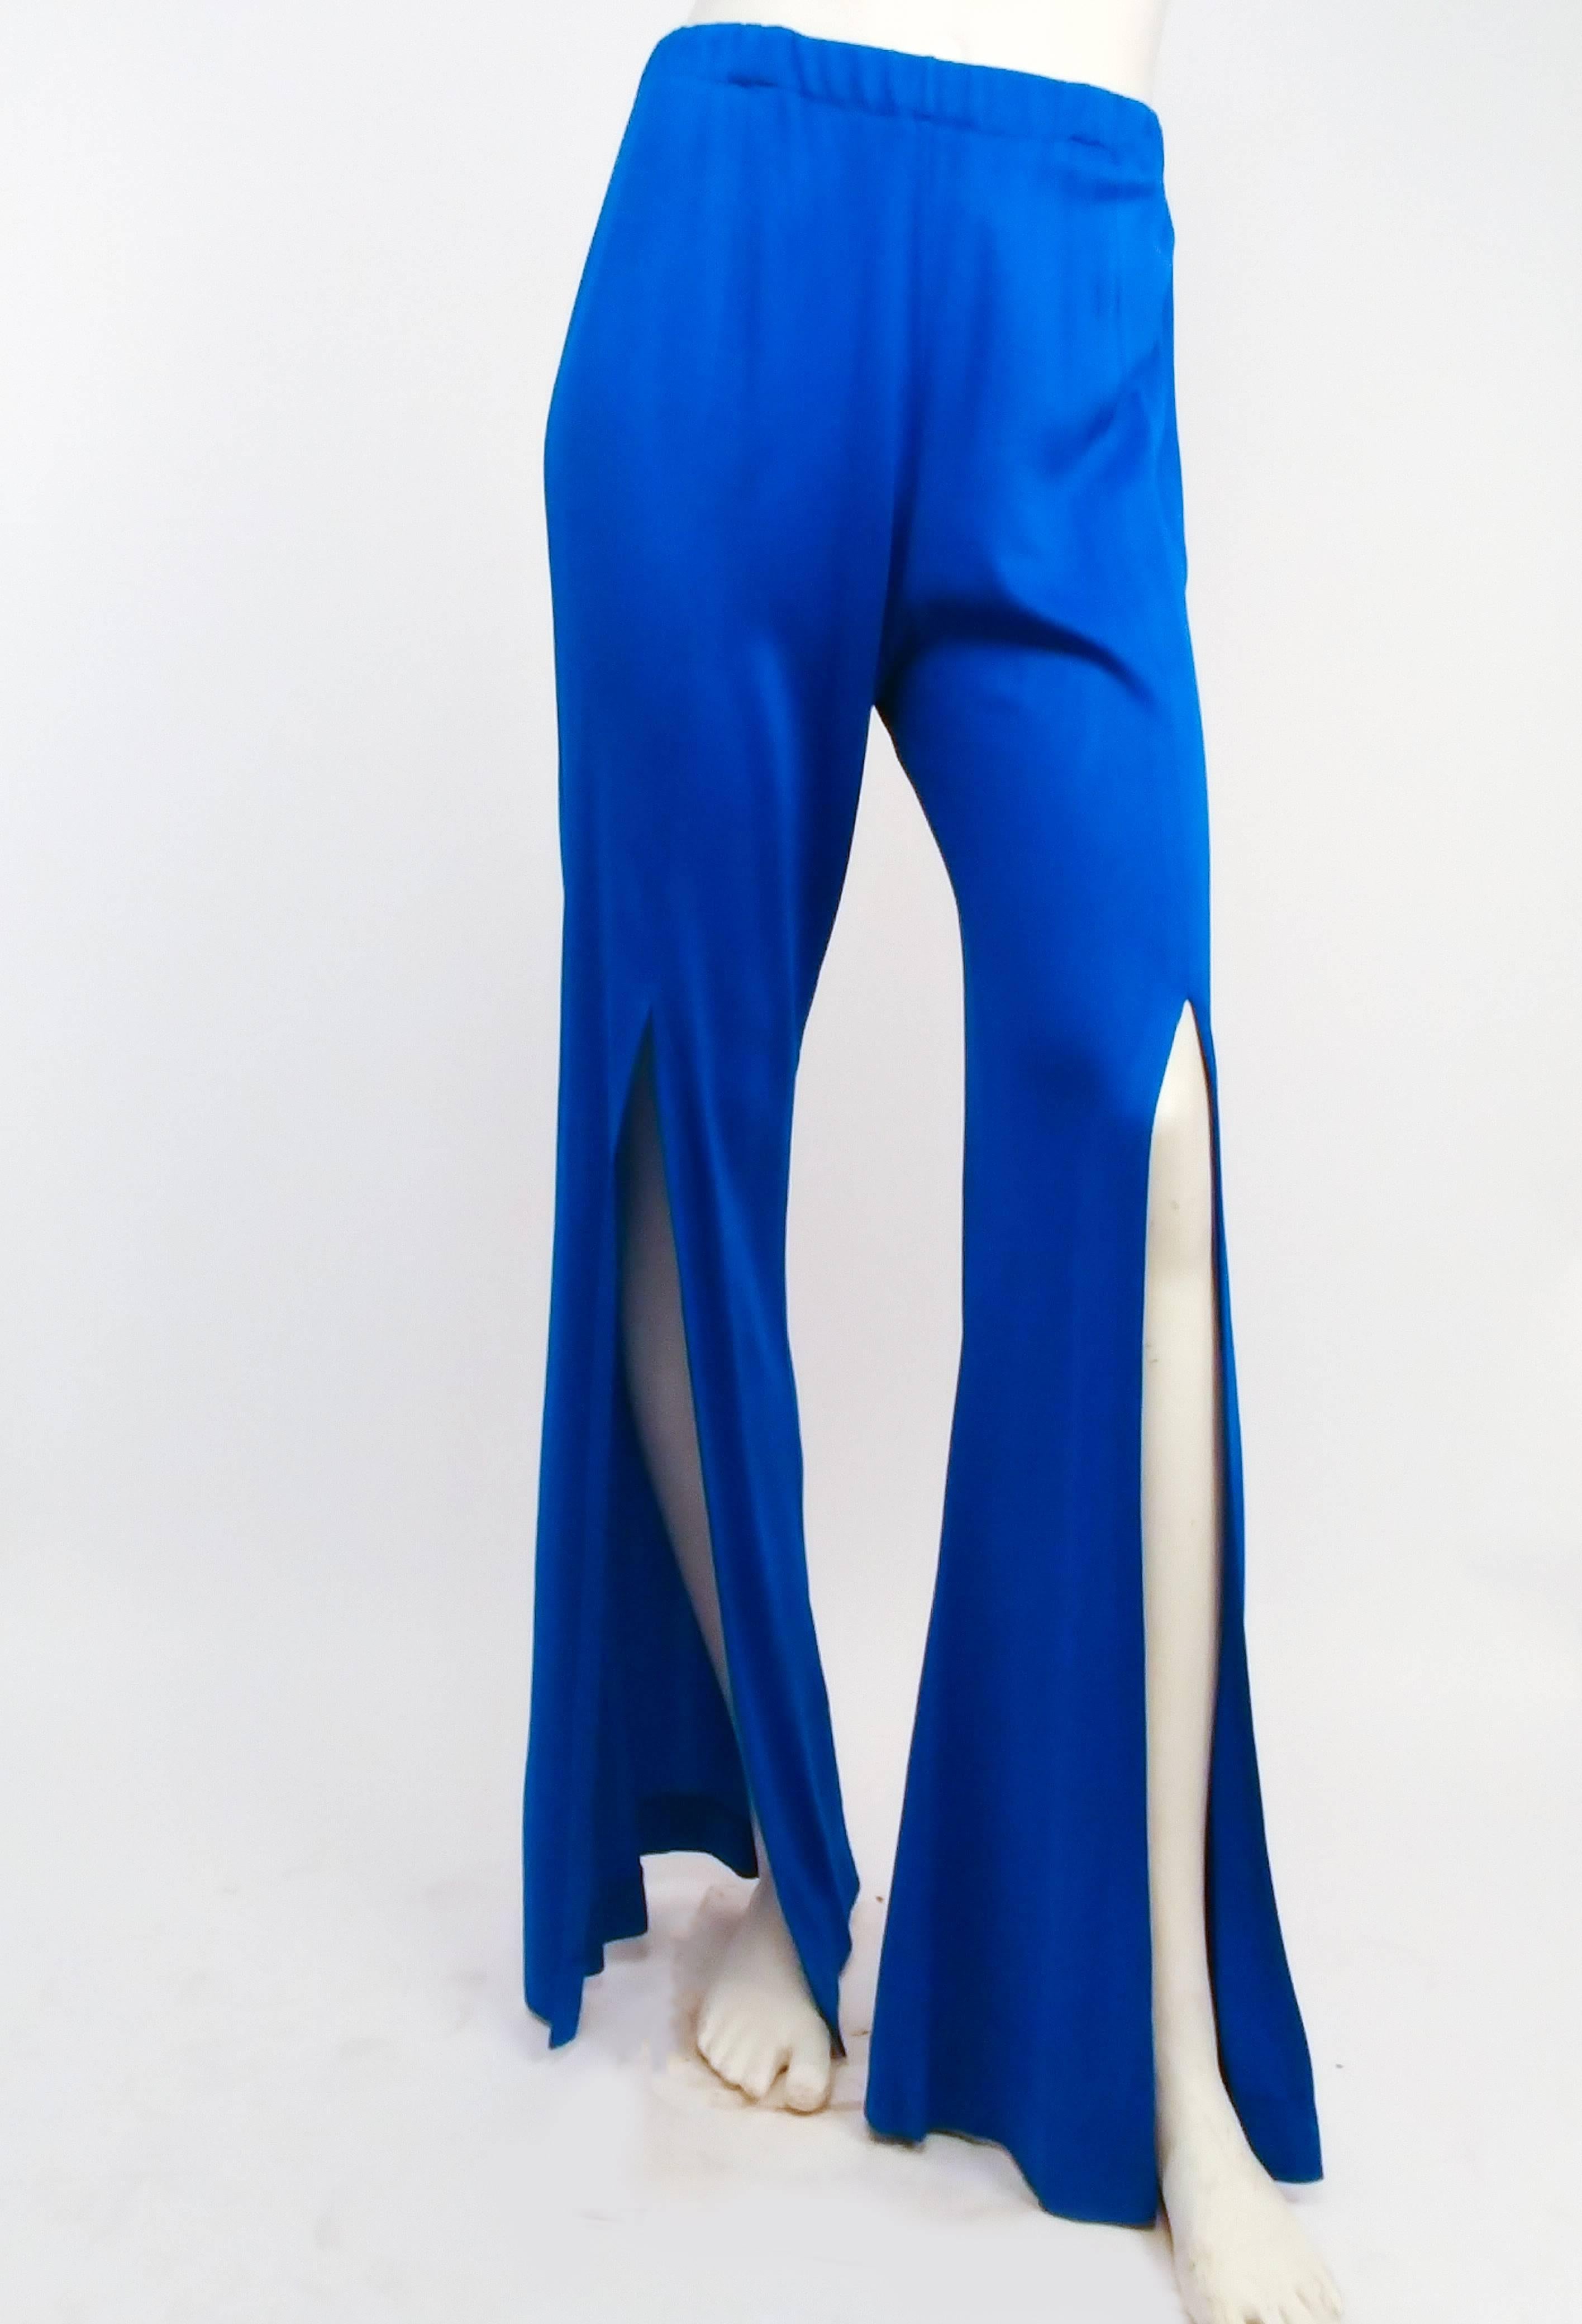 1970s Electric Blue Tunic Top & Flare Pants Disco Set. Wide scoop neck collar, zips up back. Decorative button placket on one side at hem. Pants have elasticized waist and slits up to the upper knees. 